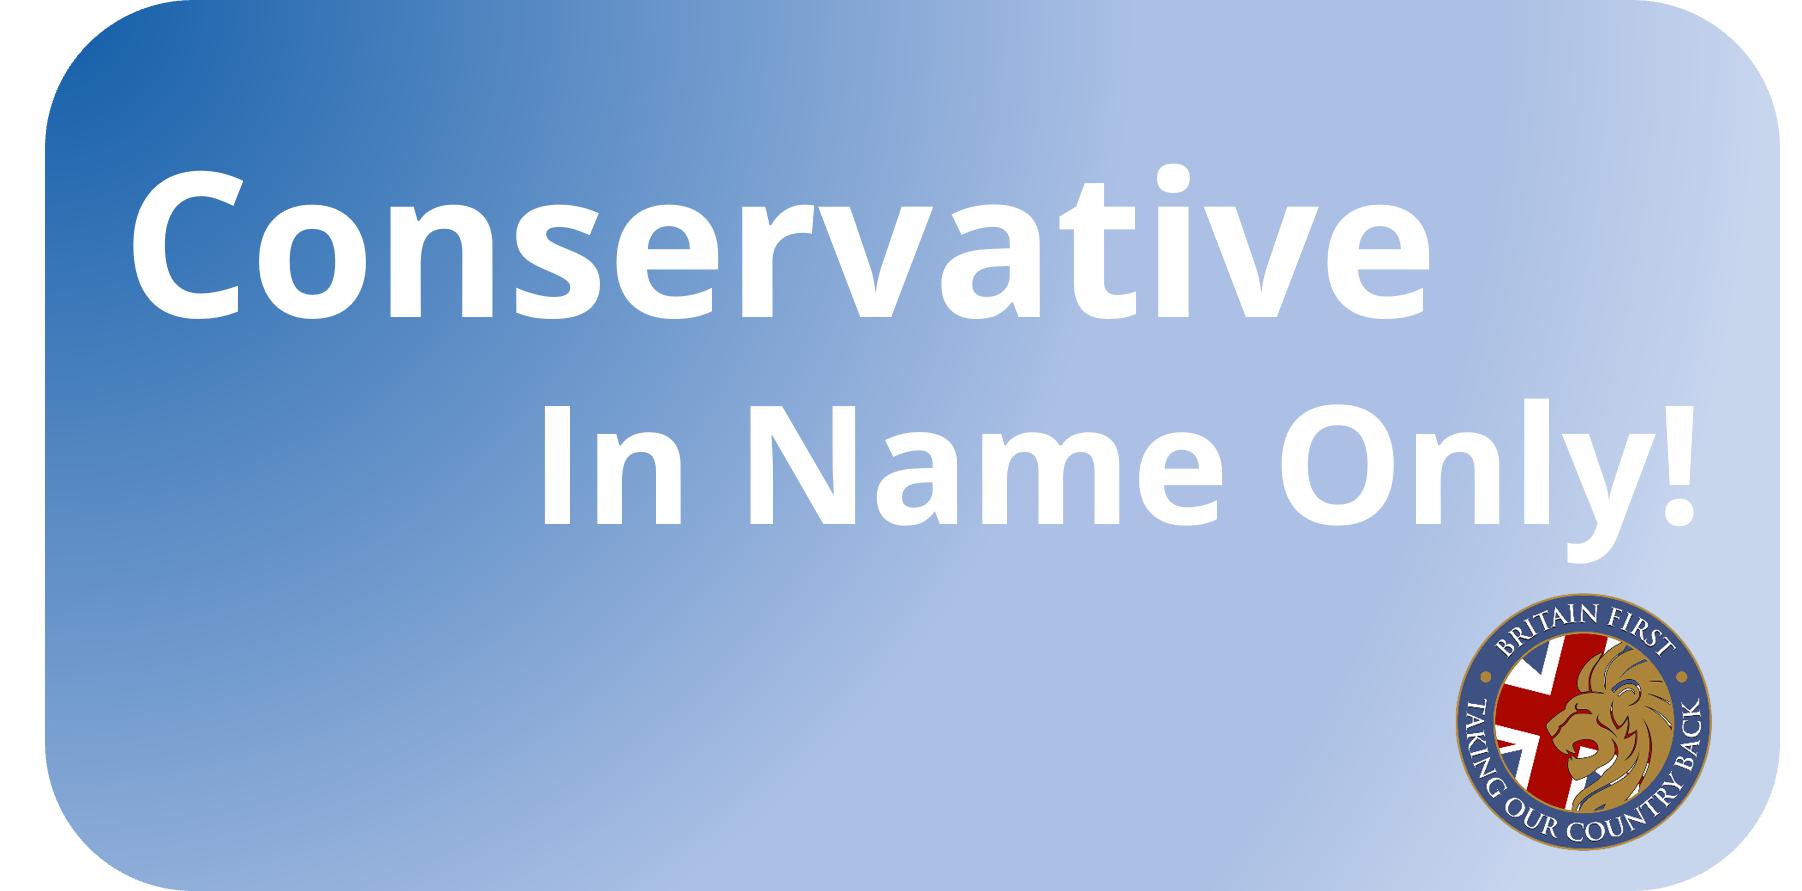 Conservatives in name only